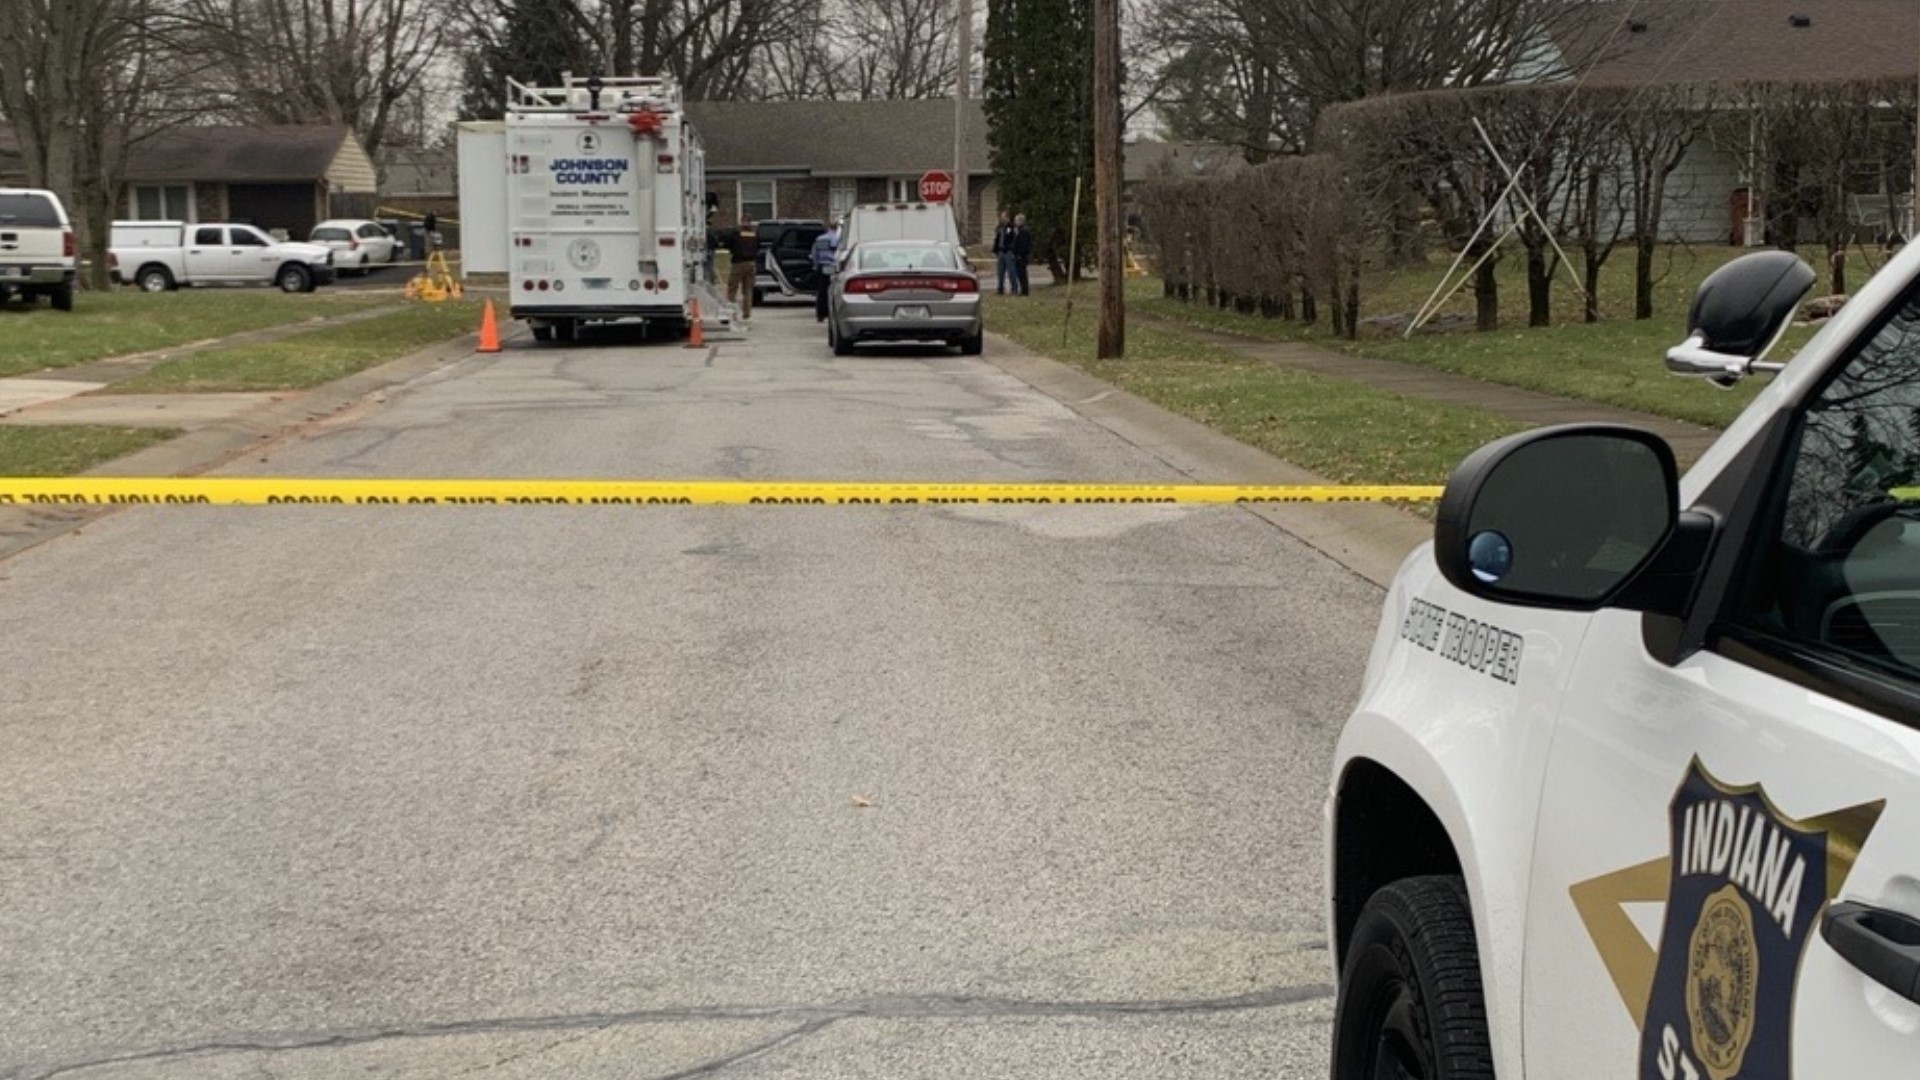 An all-night manhunt ended in Bargersville Friday when police located and shot the armed suspect, who was taken to an Indianapolis hospital.